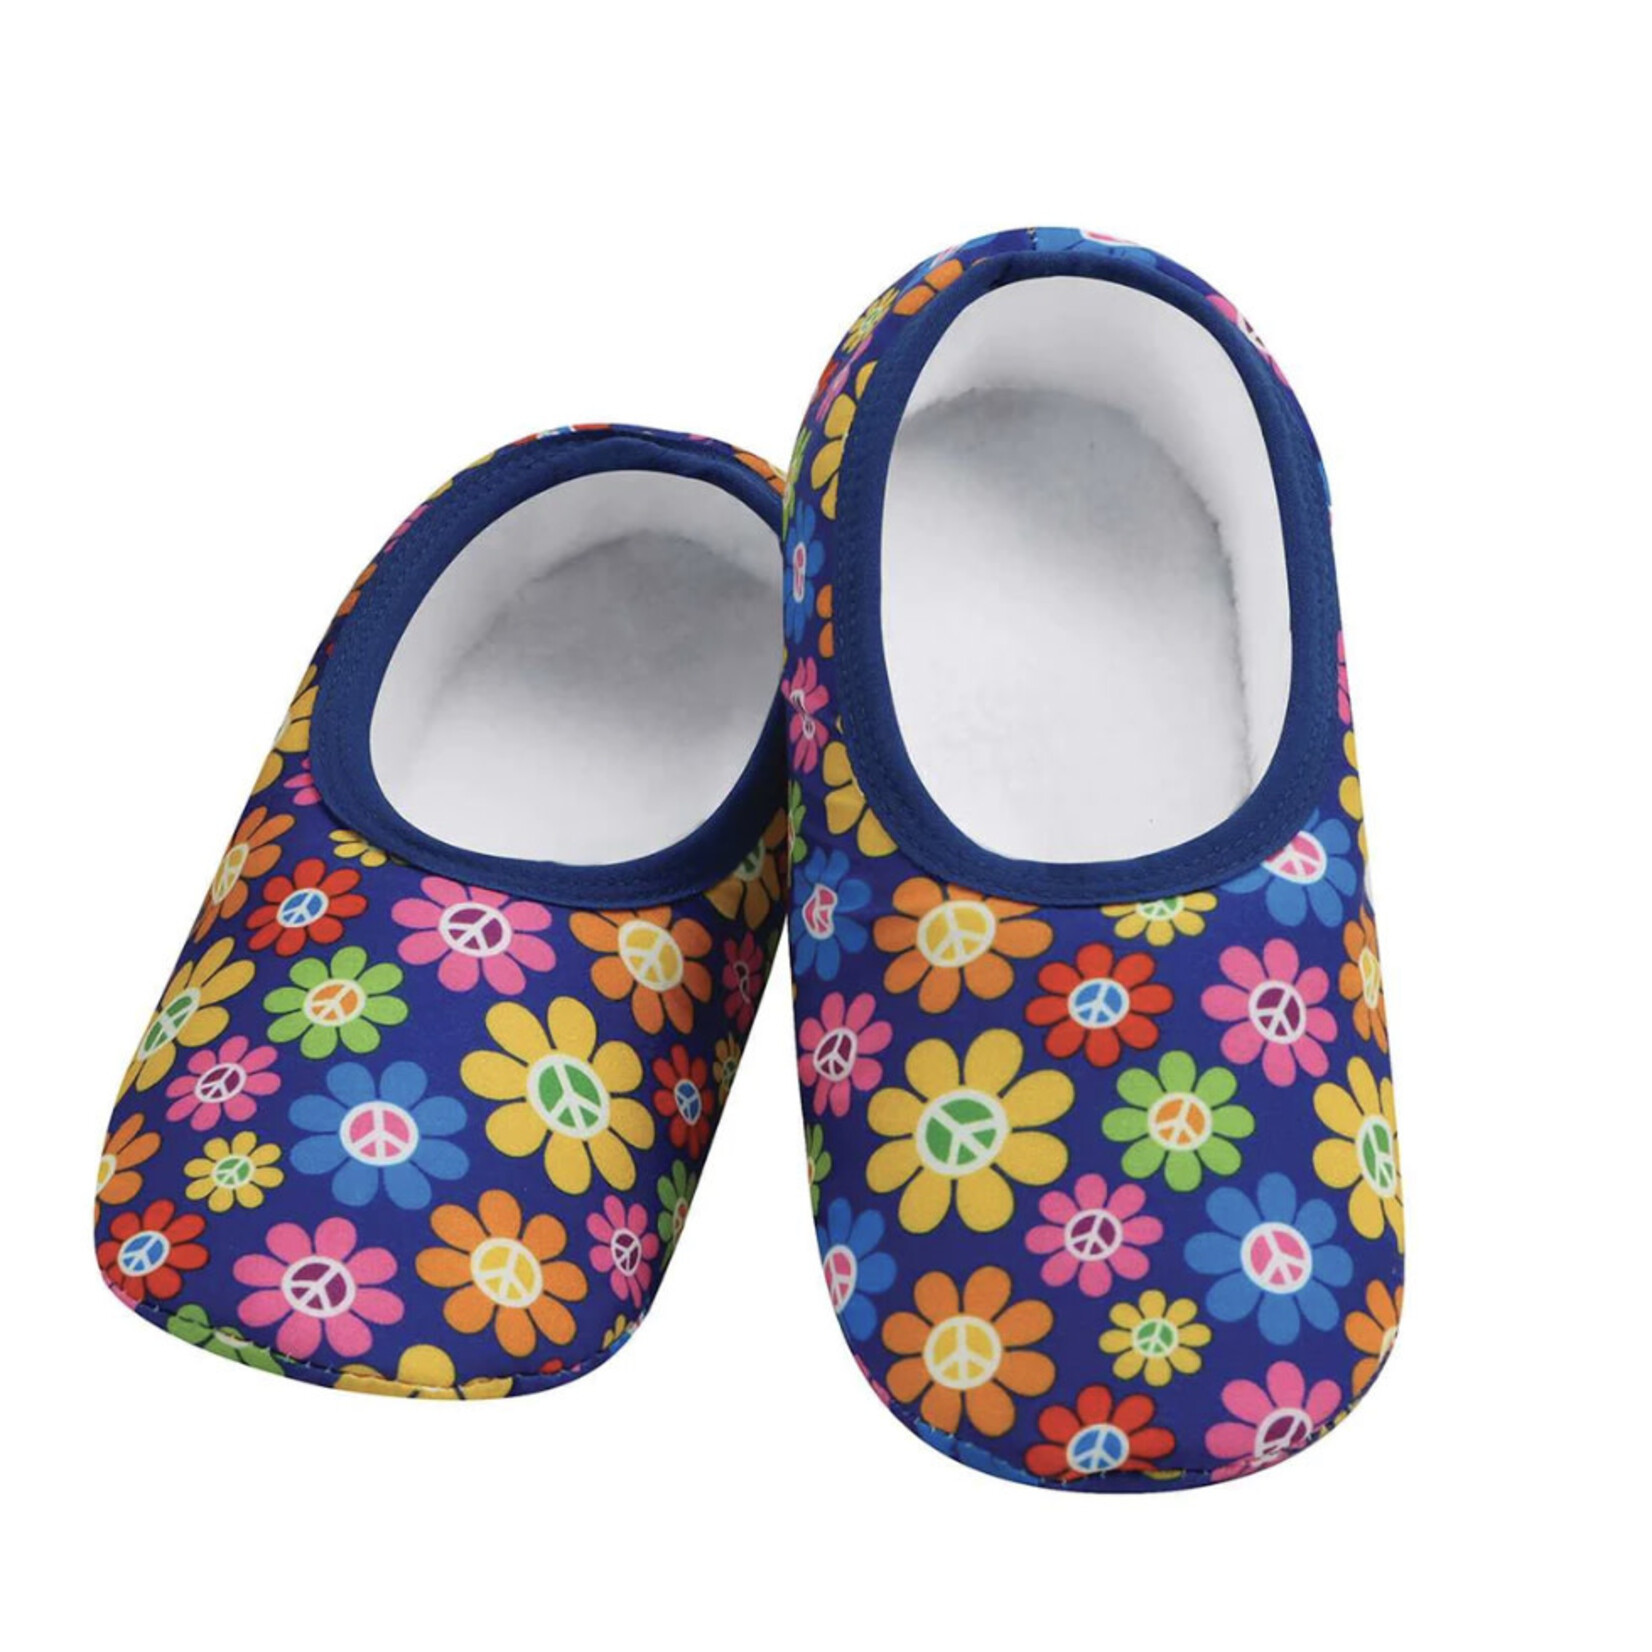 Snoozies Snoozies Daisy Plush Skinnies Slippers